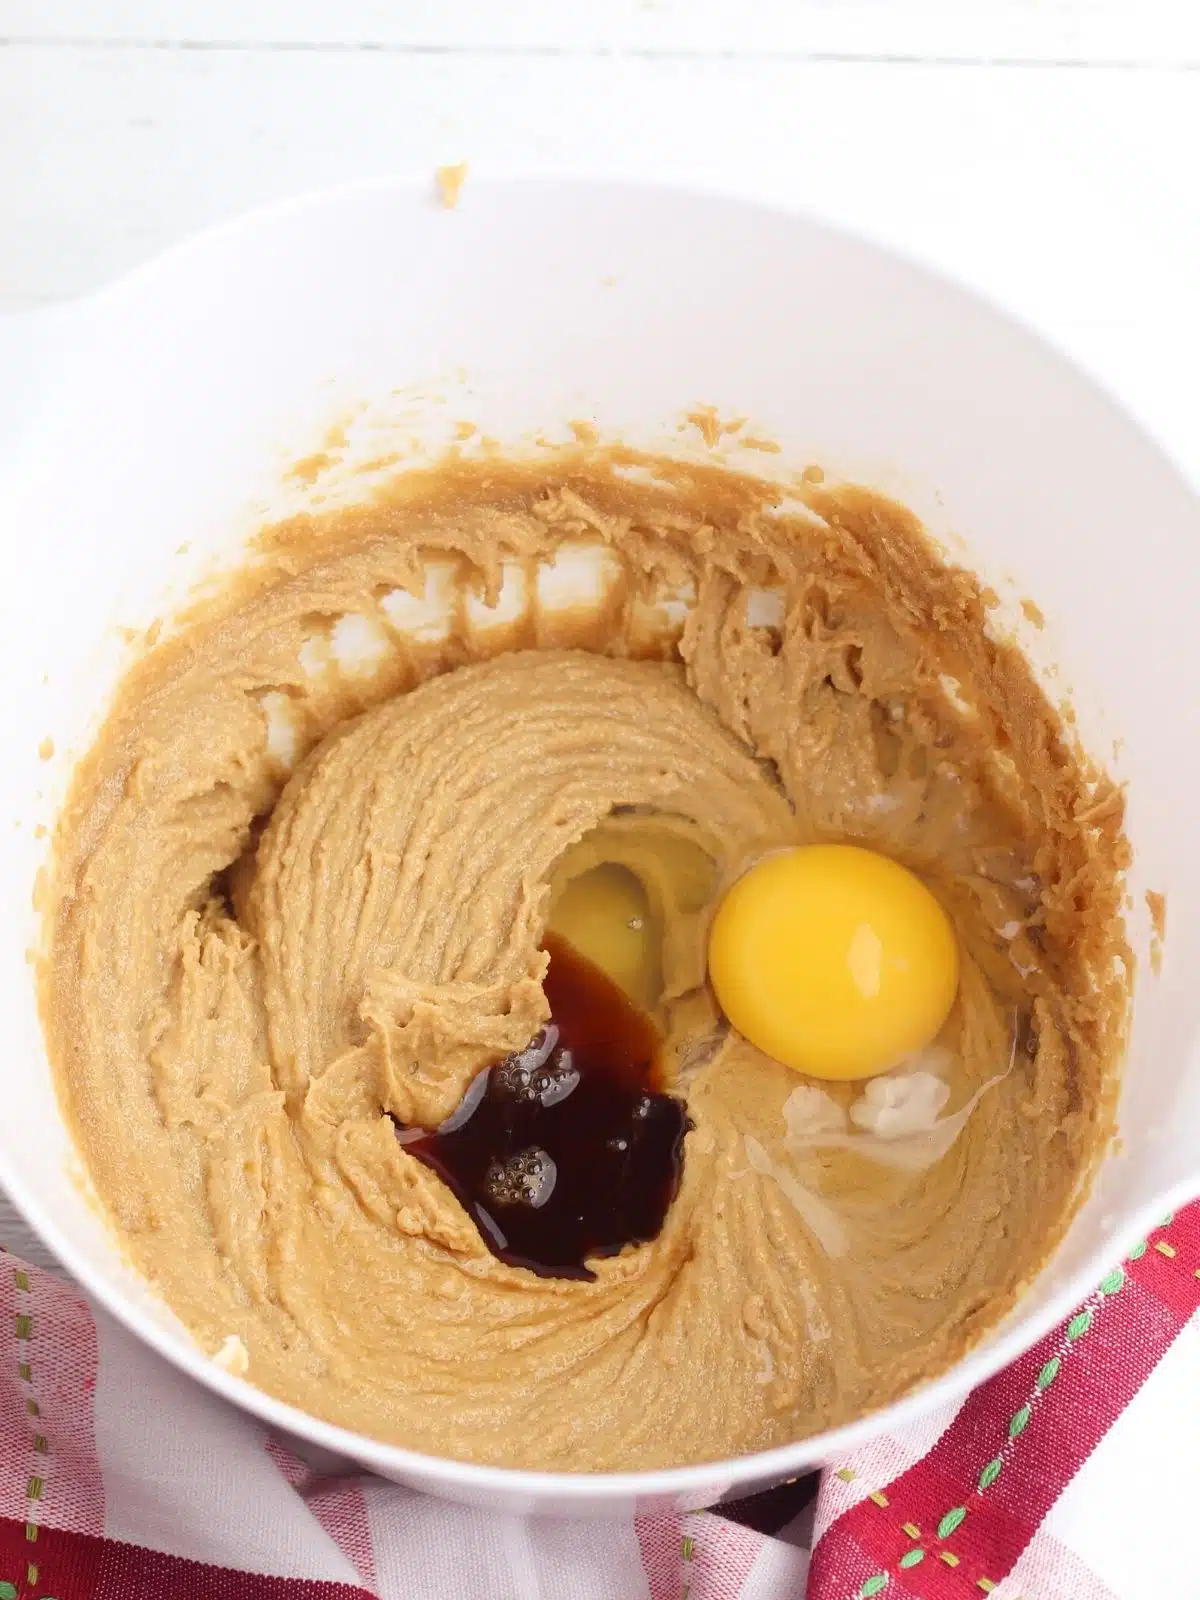 Peanut butter mixture with egg and vanilla.